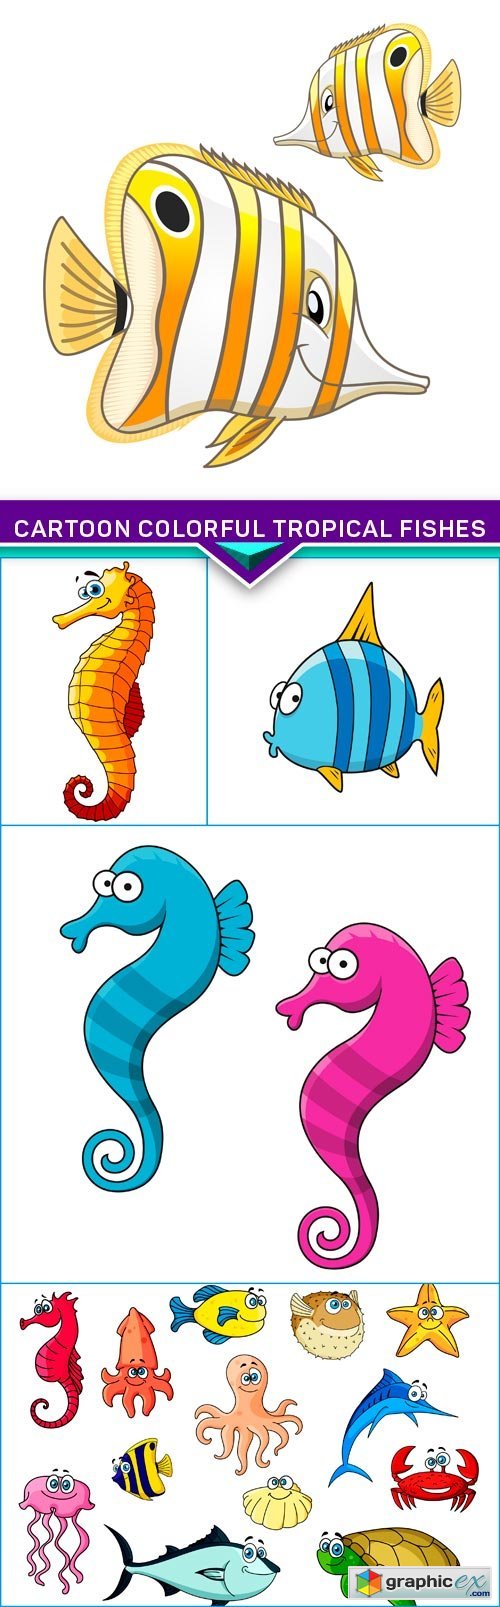 Cartoon colorful tropical fishes 5X EPS